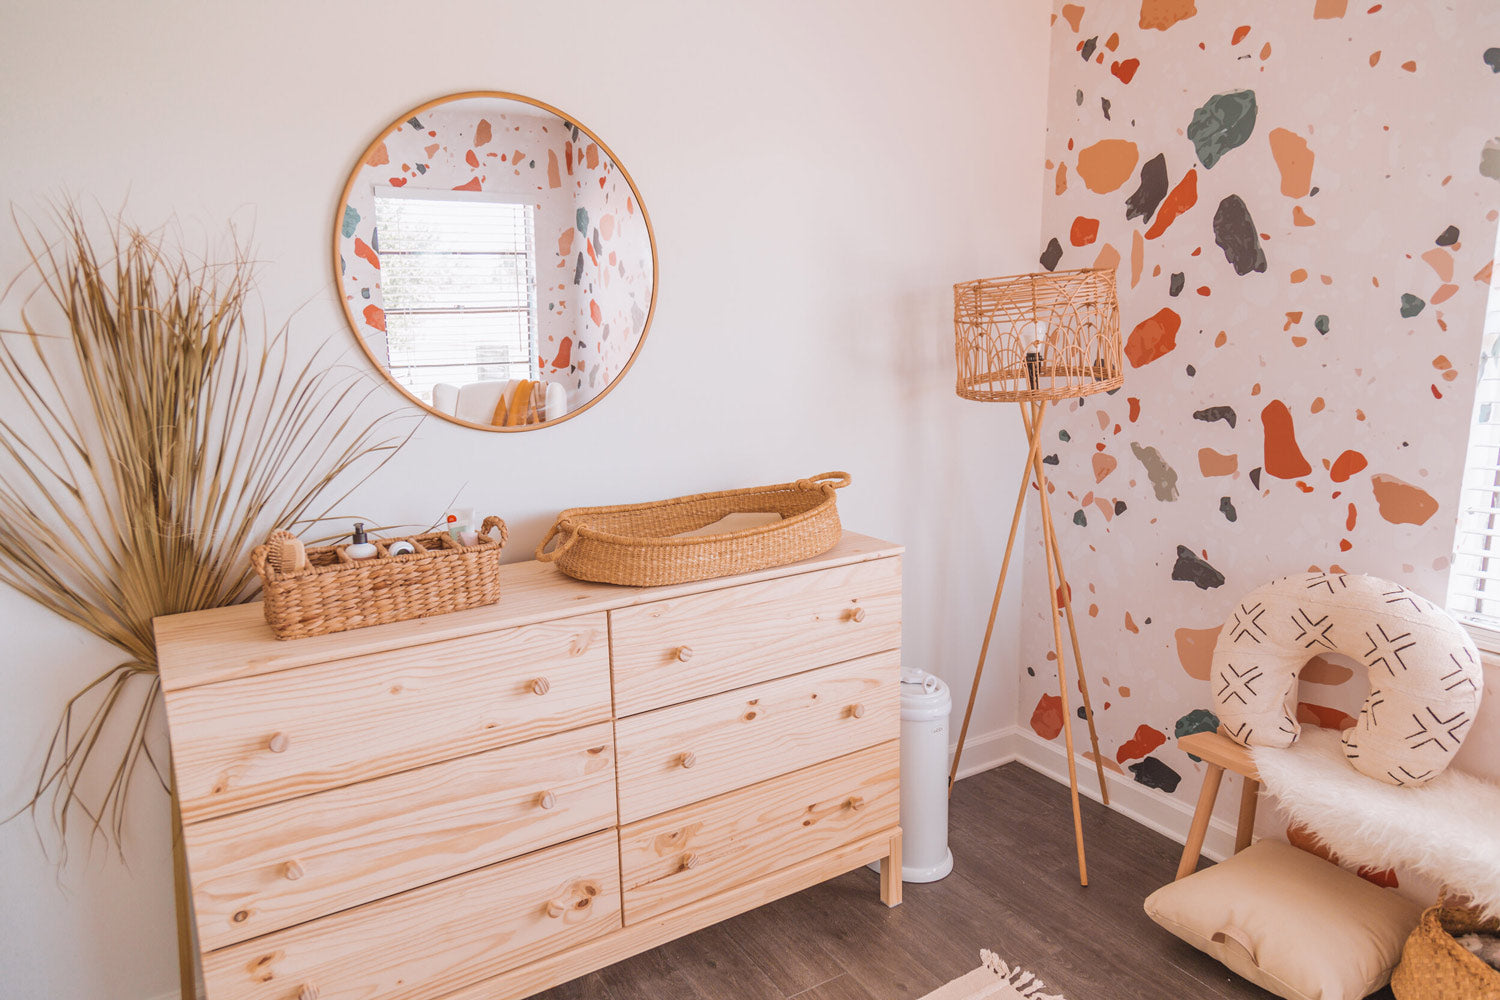 Baby nursery changing table with round mirror and dried palm leaf decor